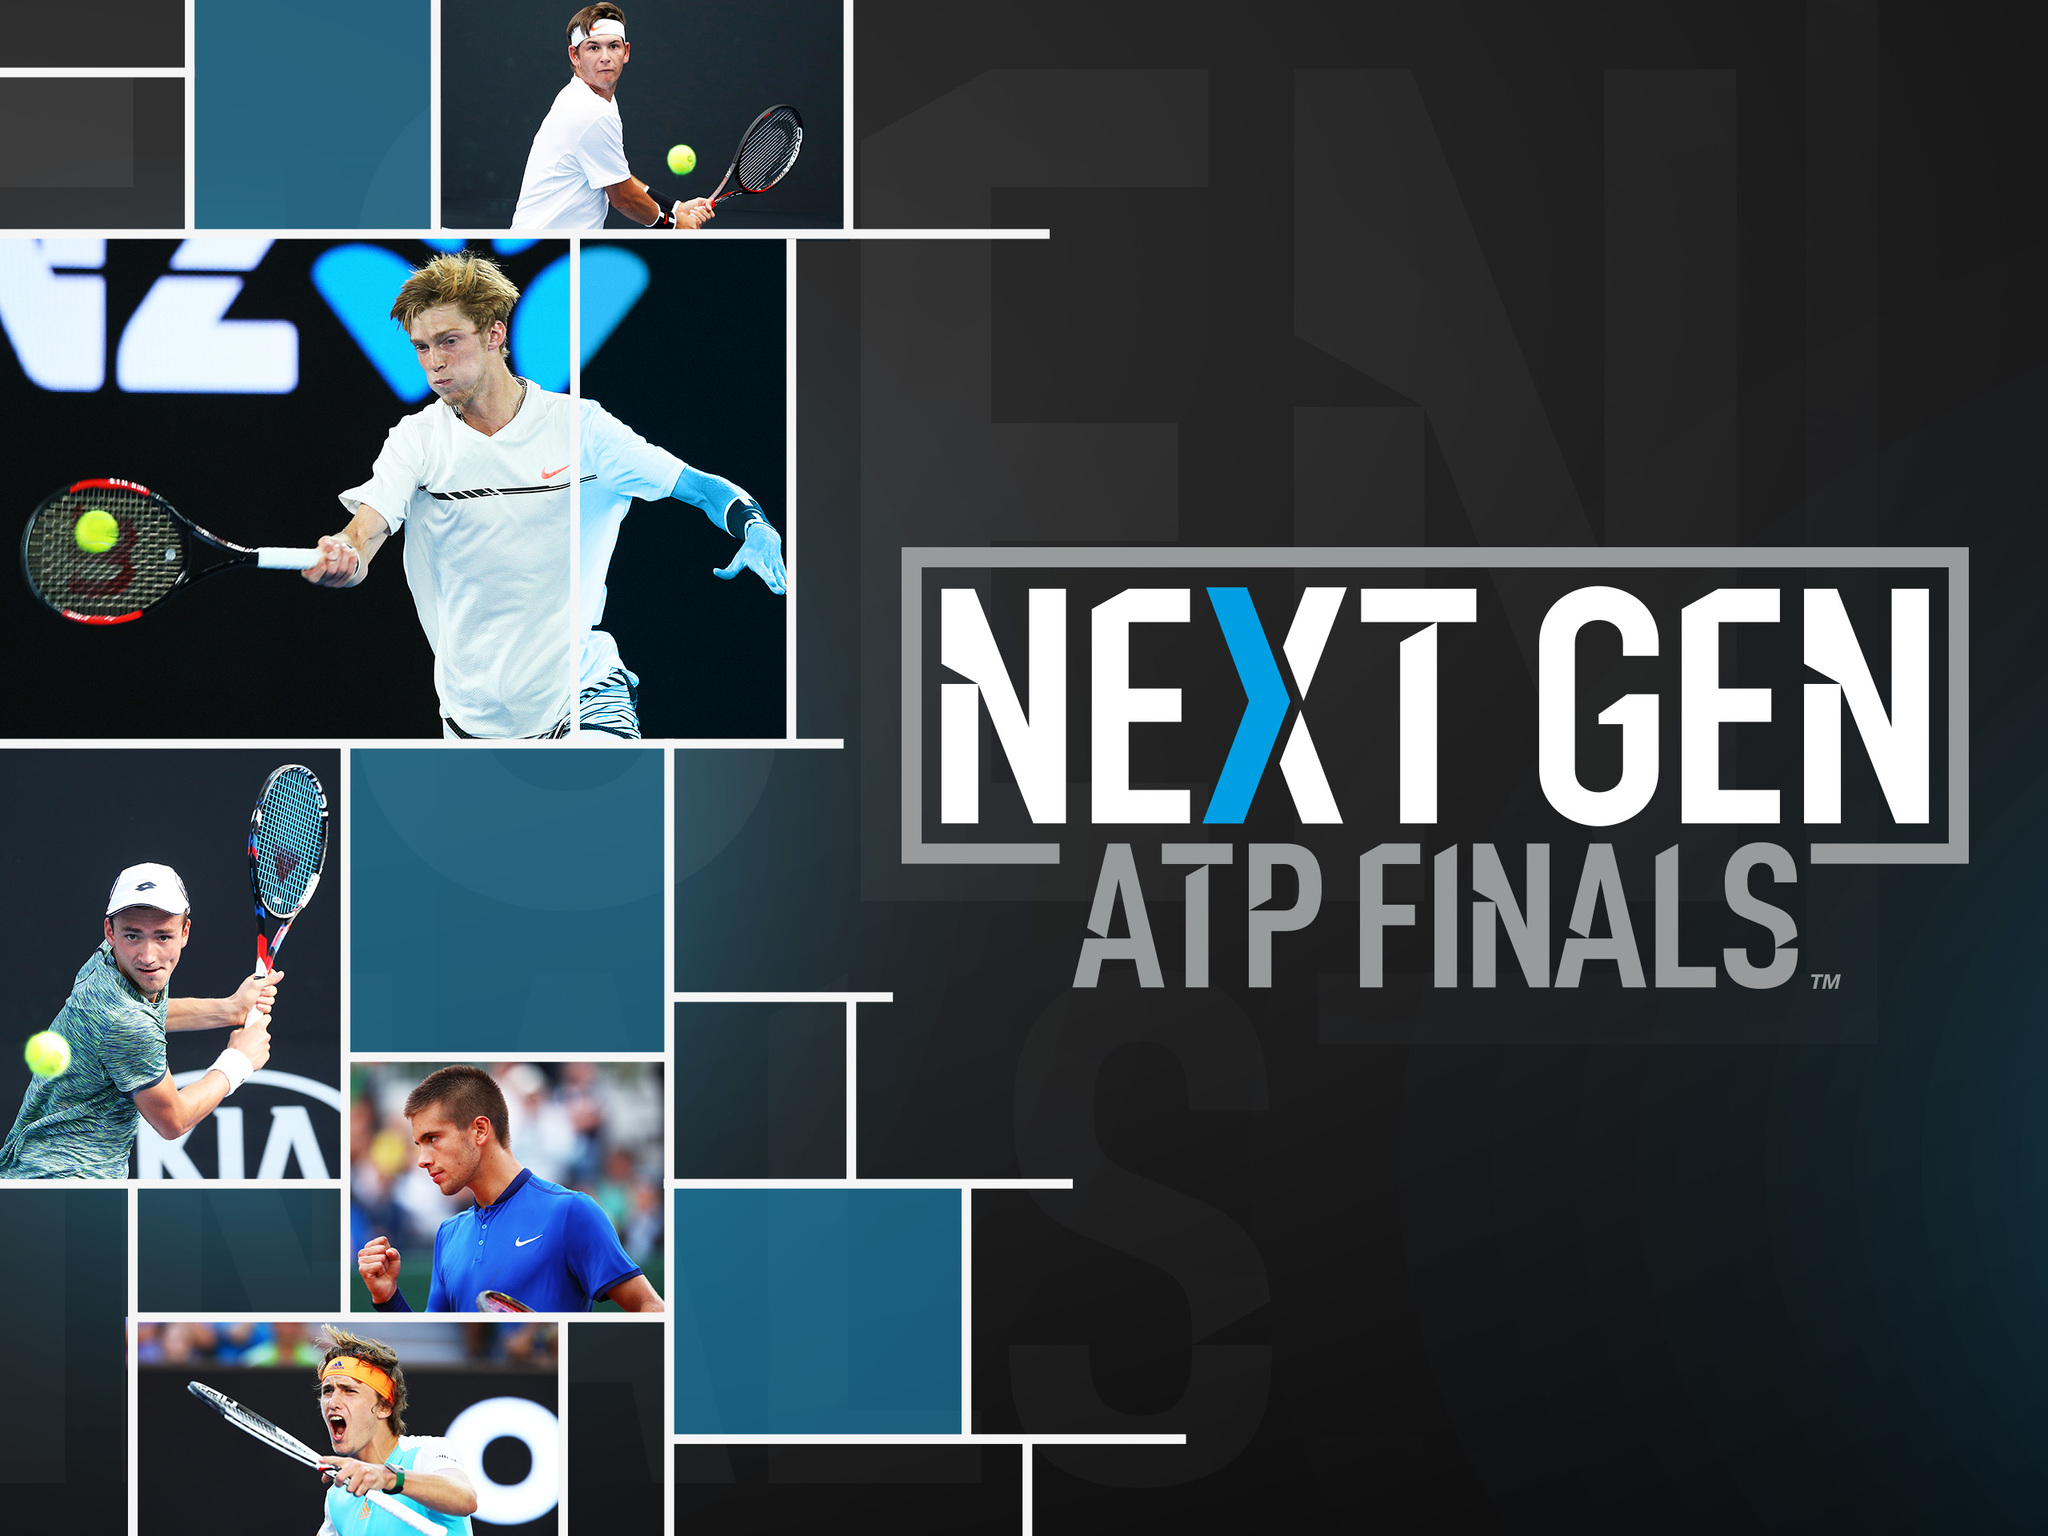 Live Tennis Comes to Amazon Prime Video With Inaugural Next-Gen ATP Finals